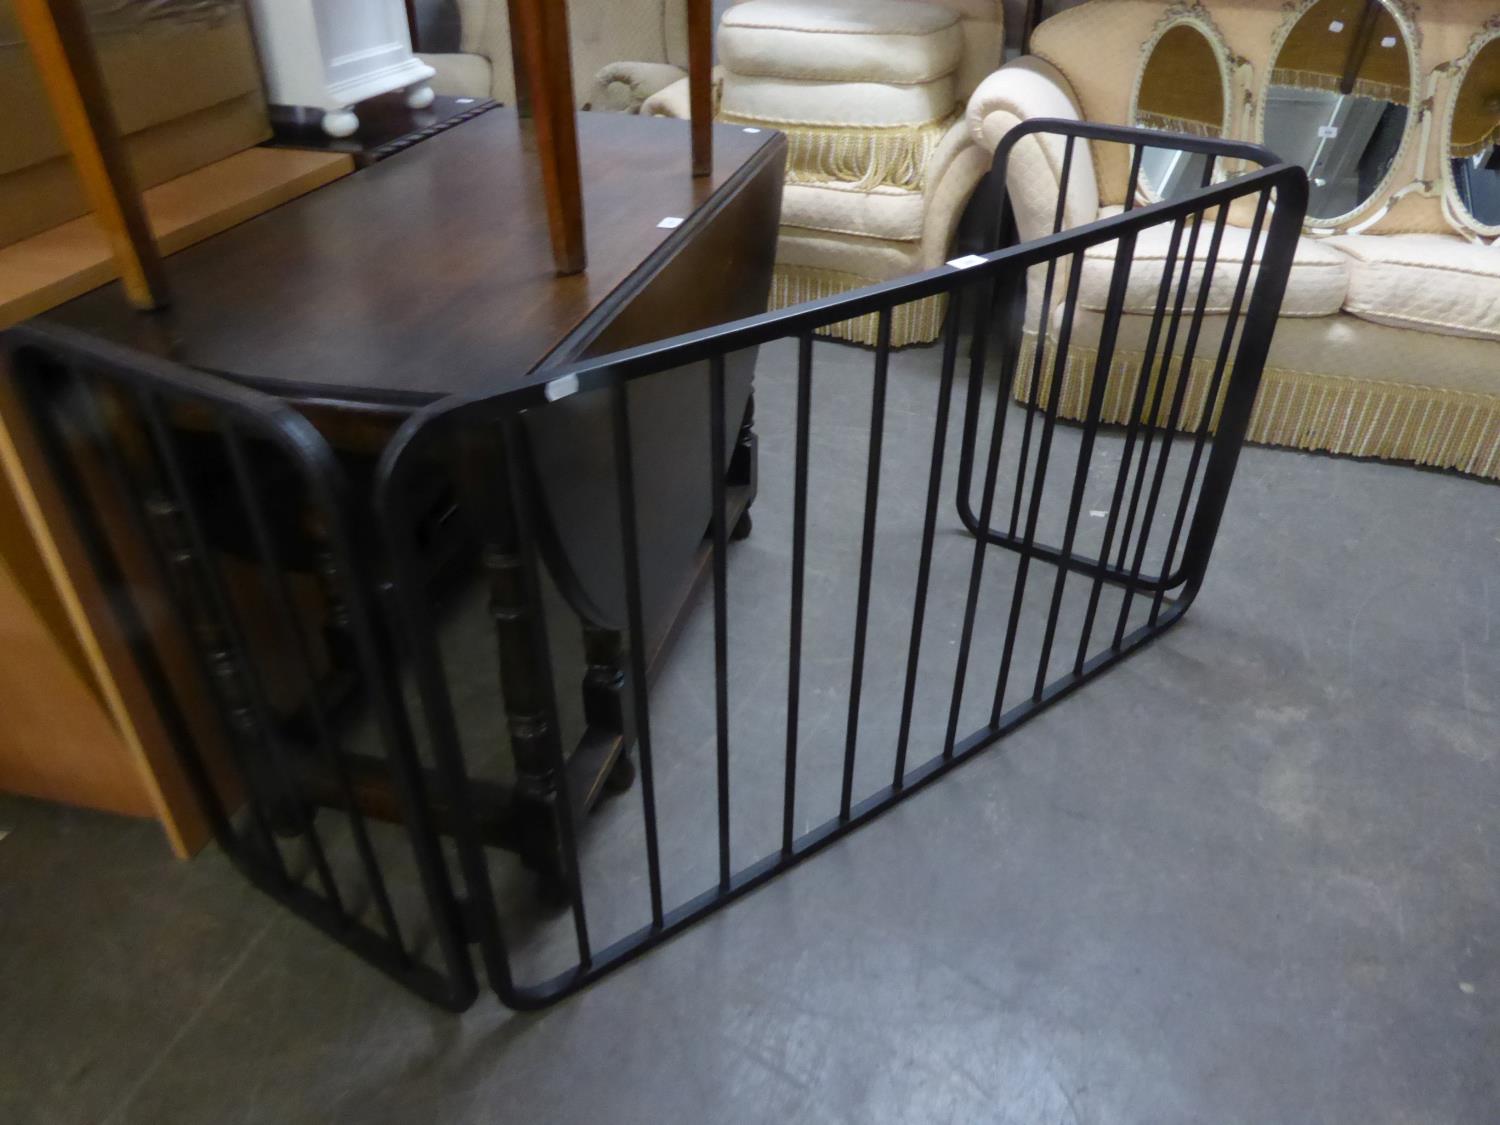 A HEAVY BLACK WROUGHT IRON THREE-SECTION FOLDING FIRE-GUARD